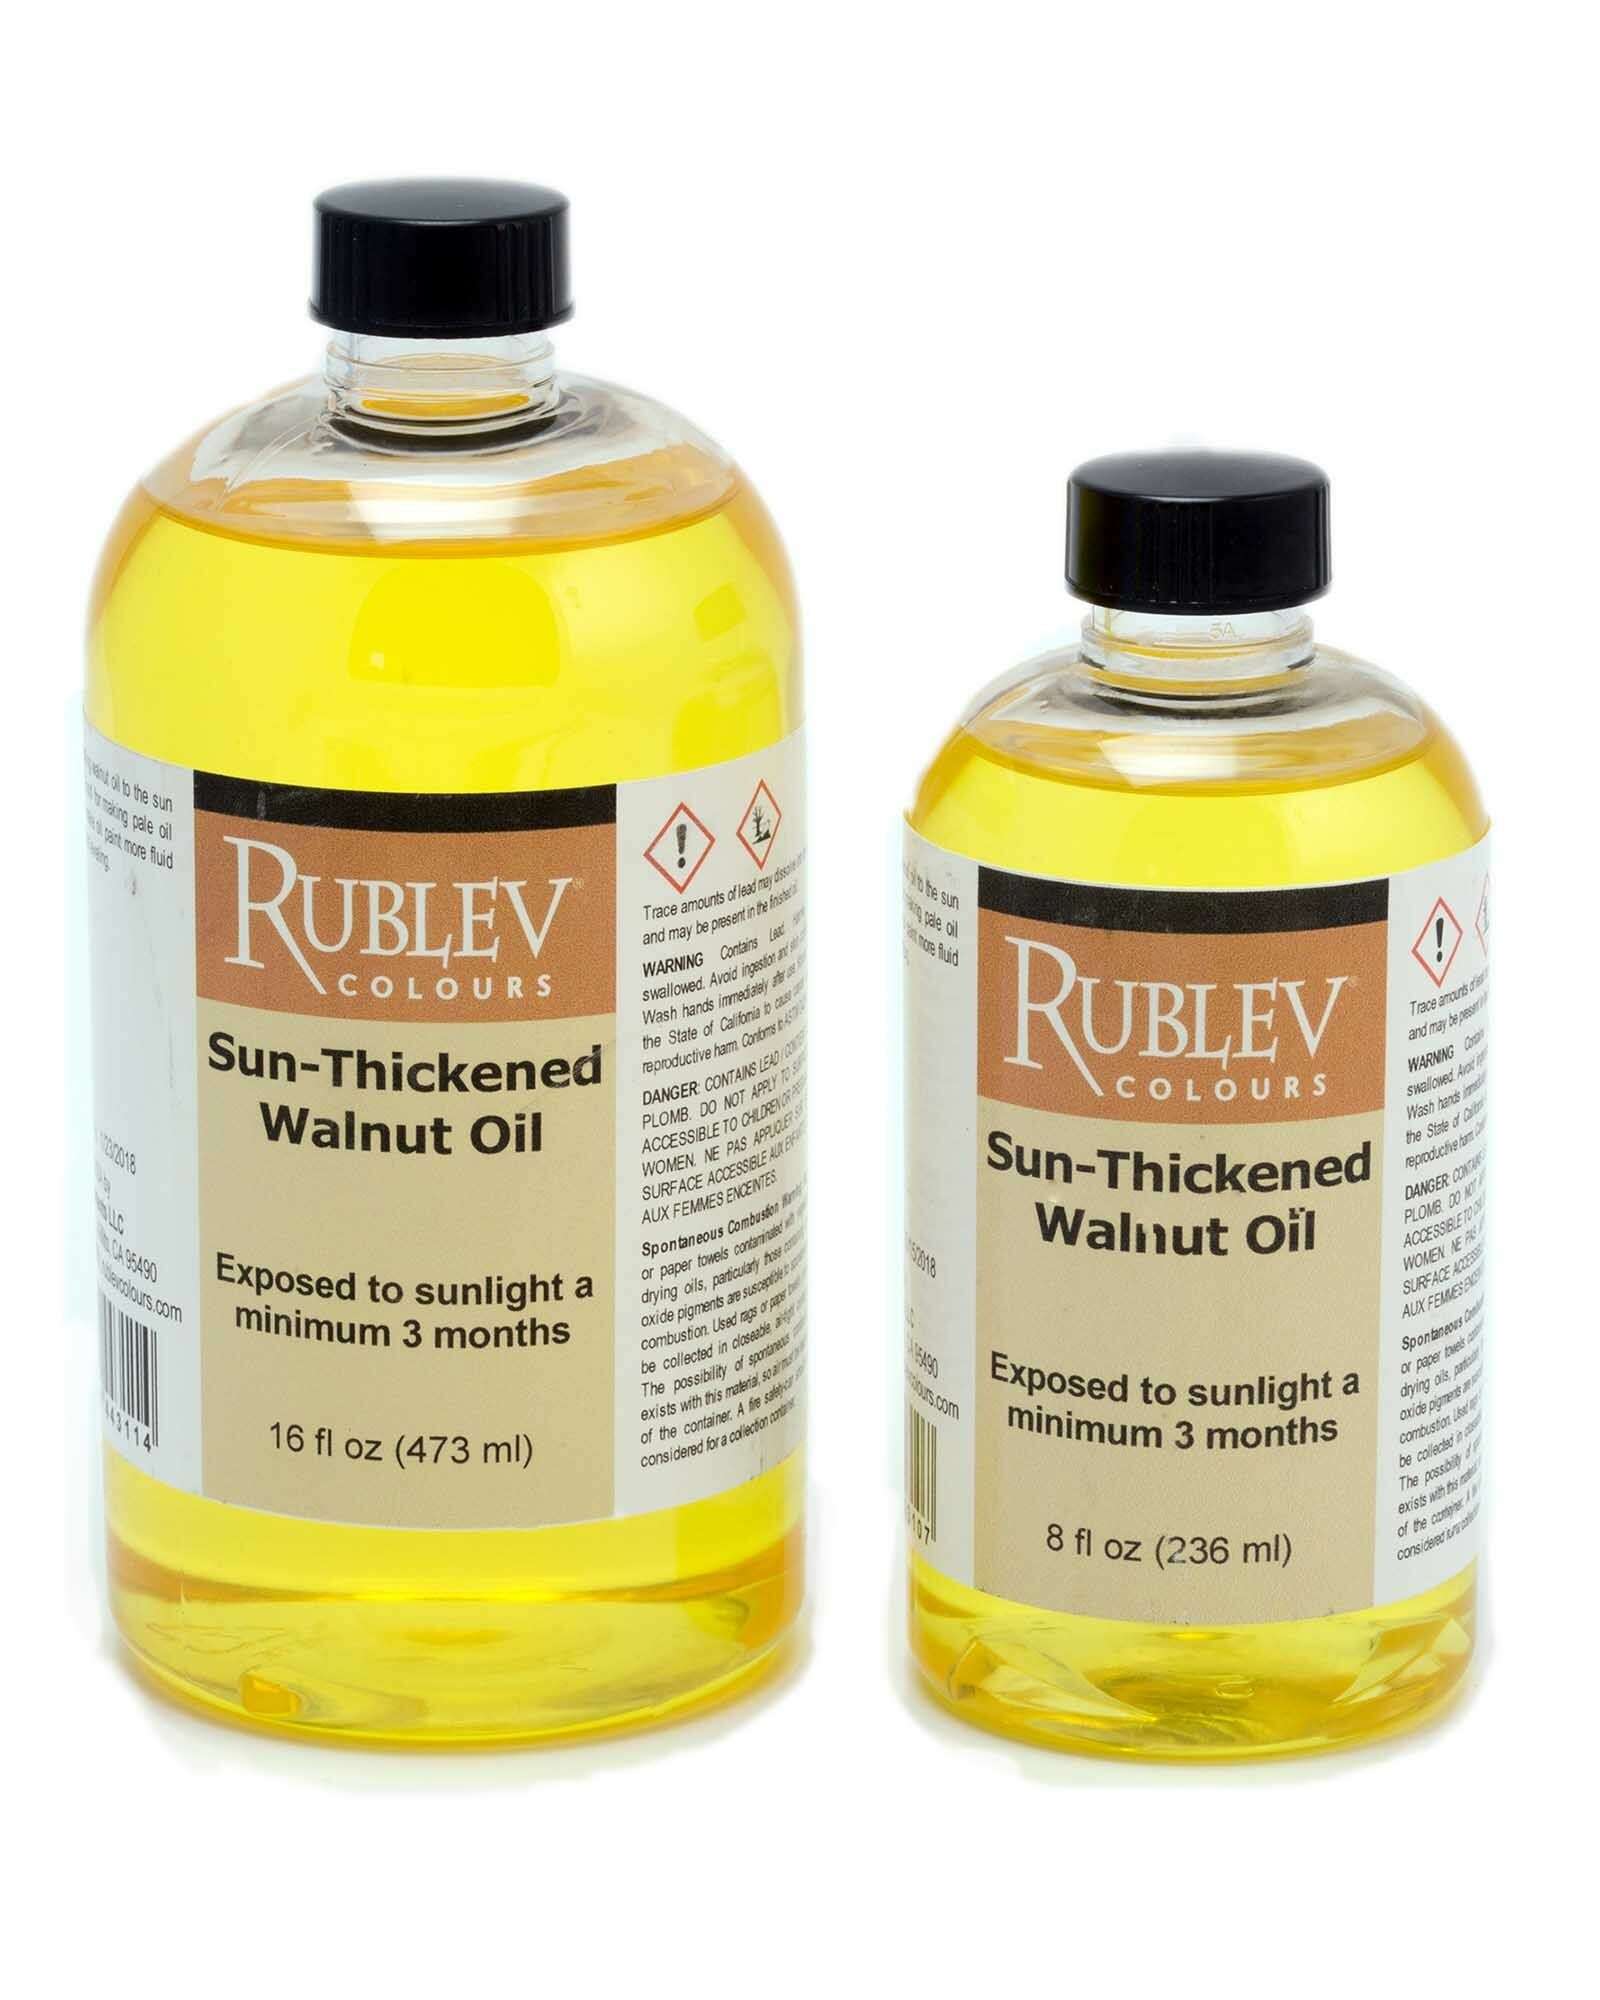 Sun-Thickened Linseed Oil